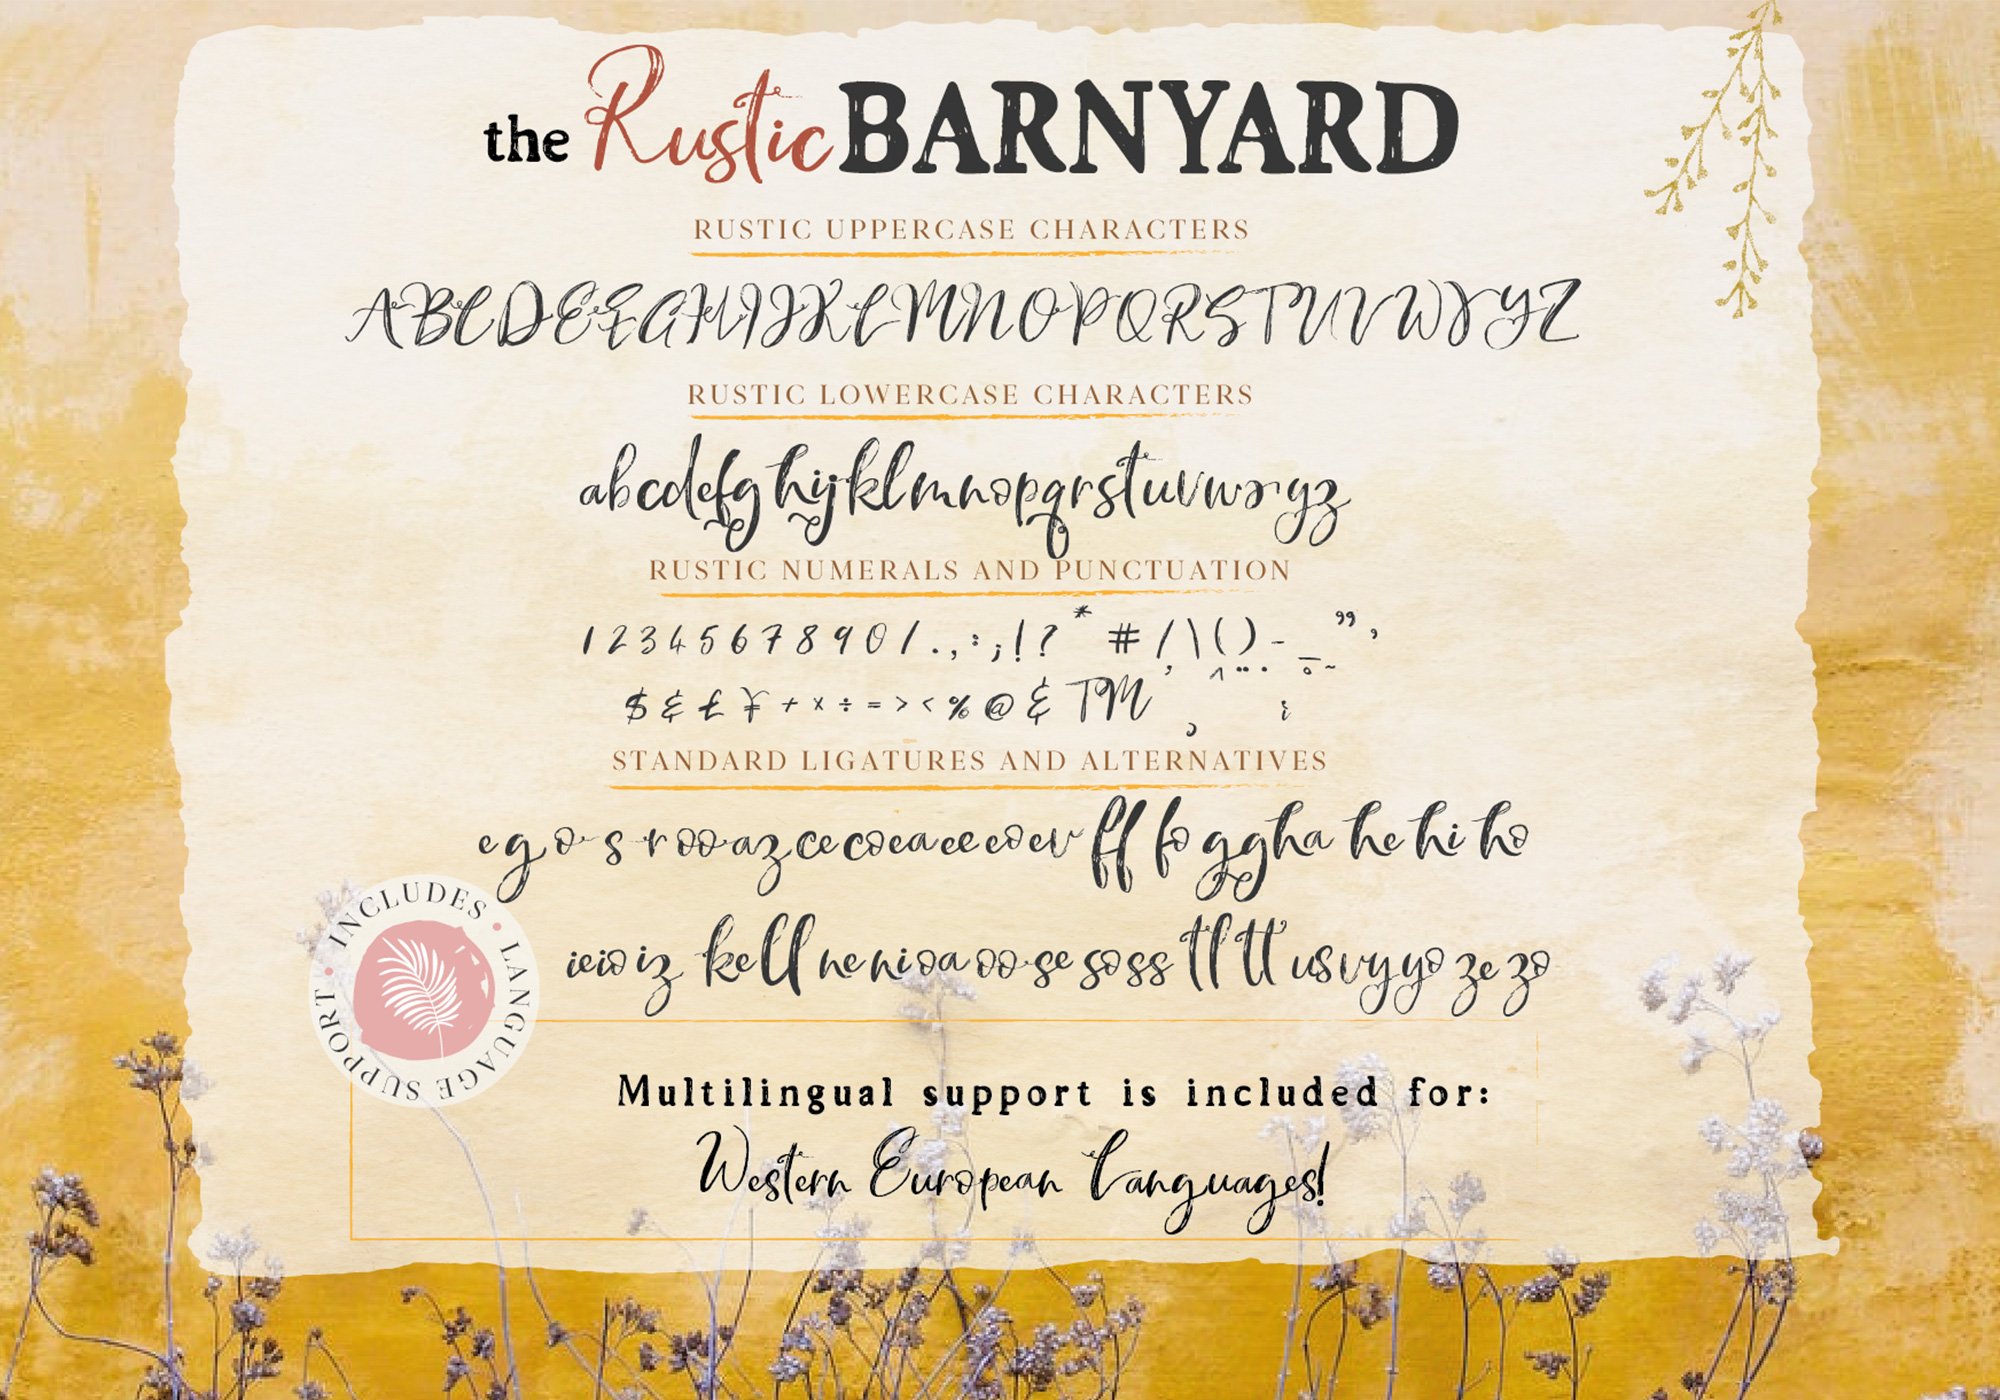 The Rustic Barnyard Font Collection